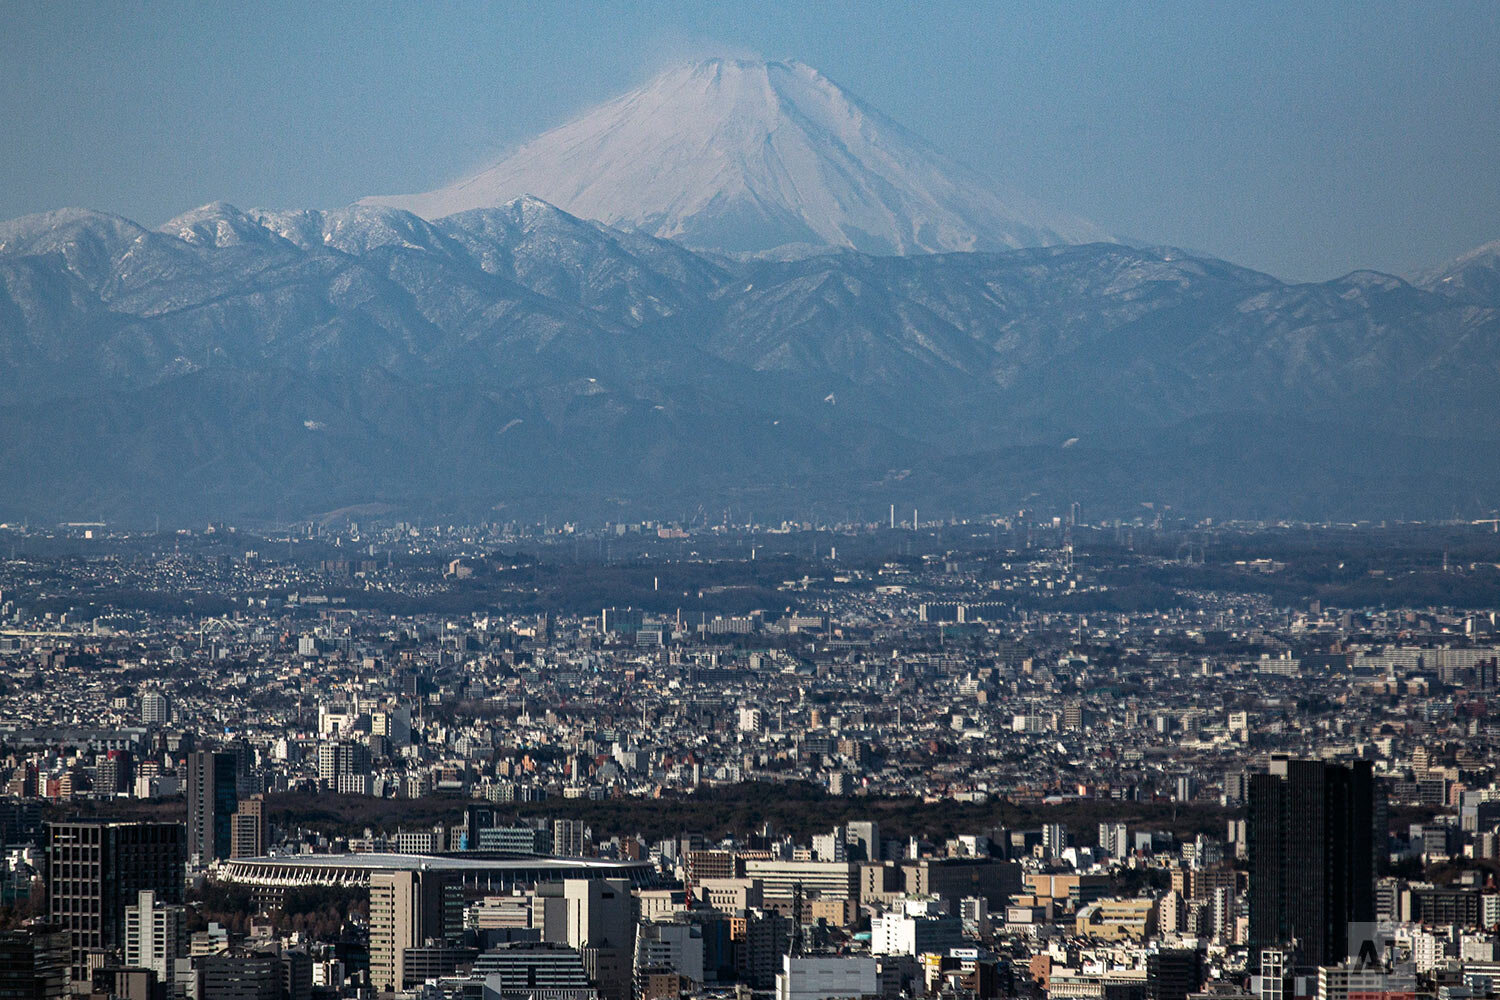  Mount Fuji is viewed clearly through the cool winter air as Japan National Stadium, front left, where an opening ceremony and other events for Tokyo 2020 Olympics are planned, are is seen from an observation deck Friday, Jan. 29, 2021, in Tokyo. (AP